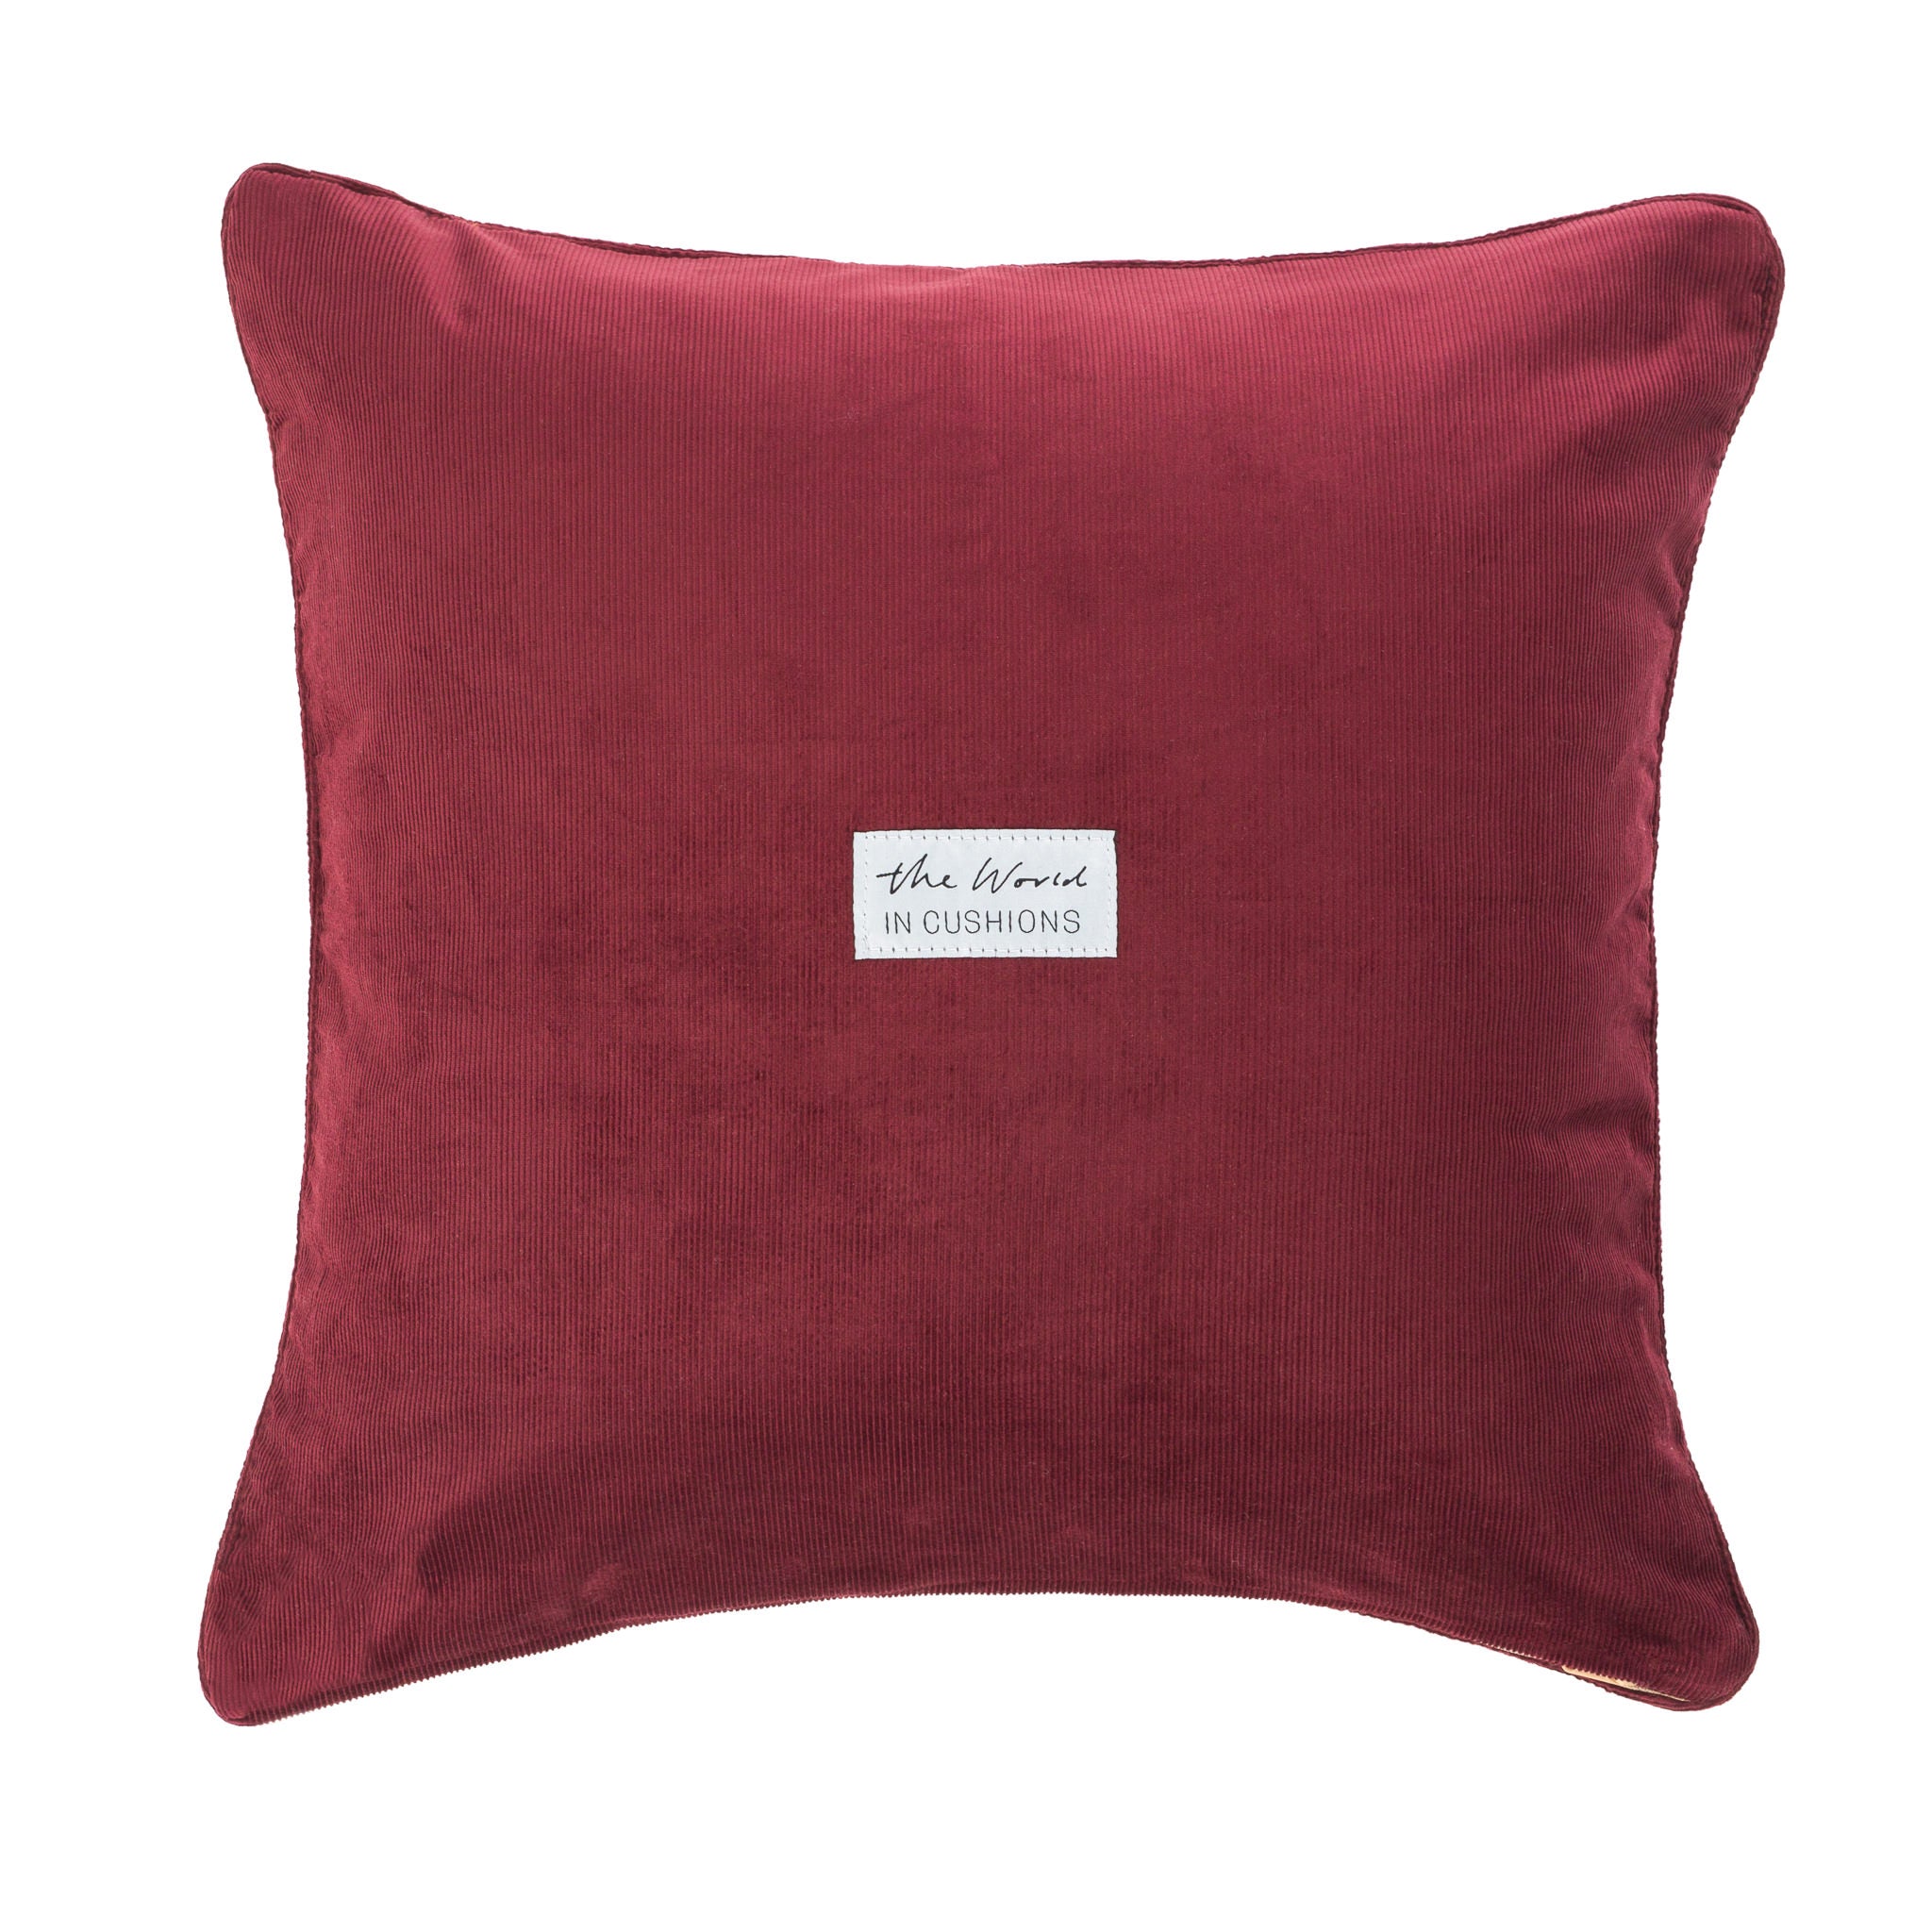 Burgundy Red and Corduroy Handwoven Square / Scatter Cushion from Bhutan - BACK